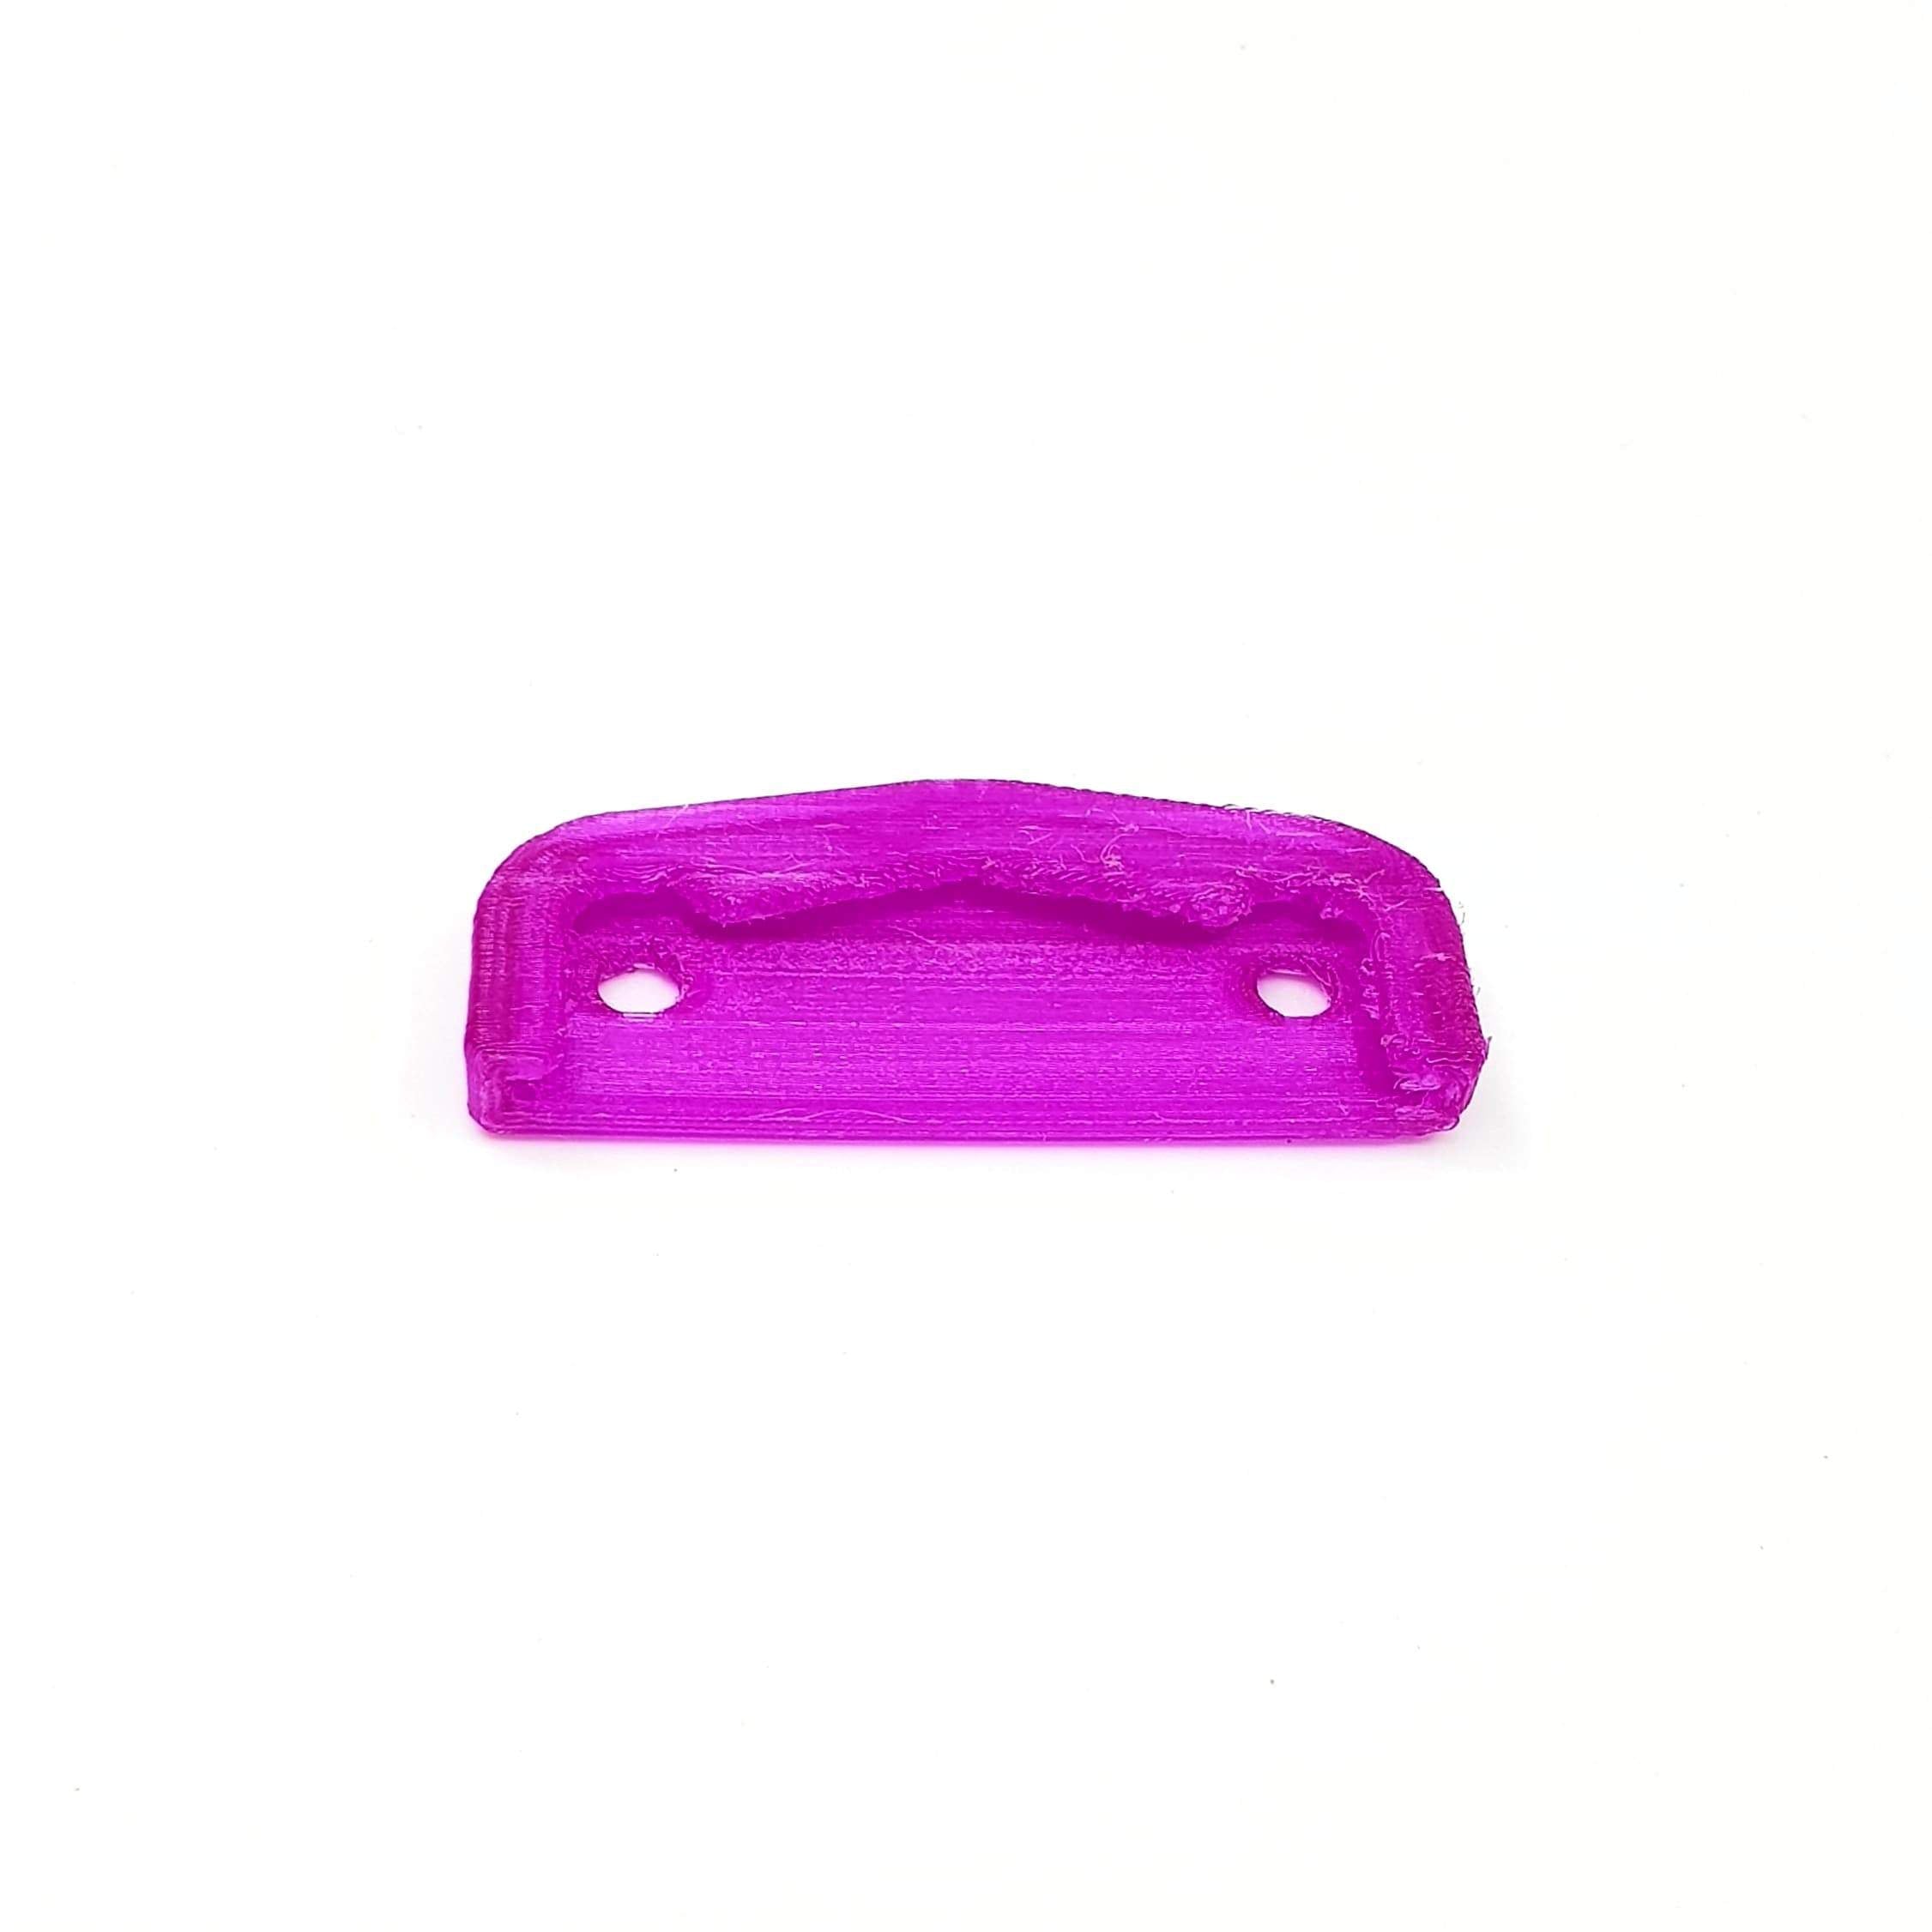 Phaser3D Reverb Front Bumper in TPU